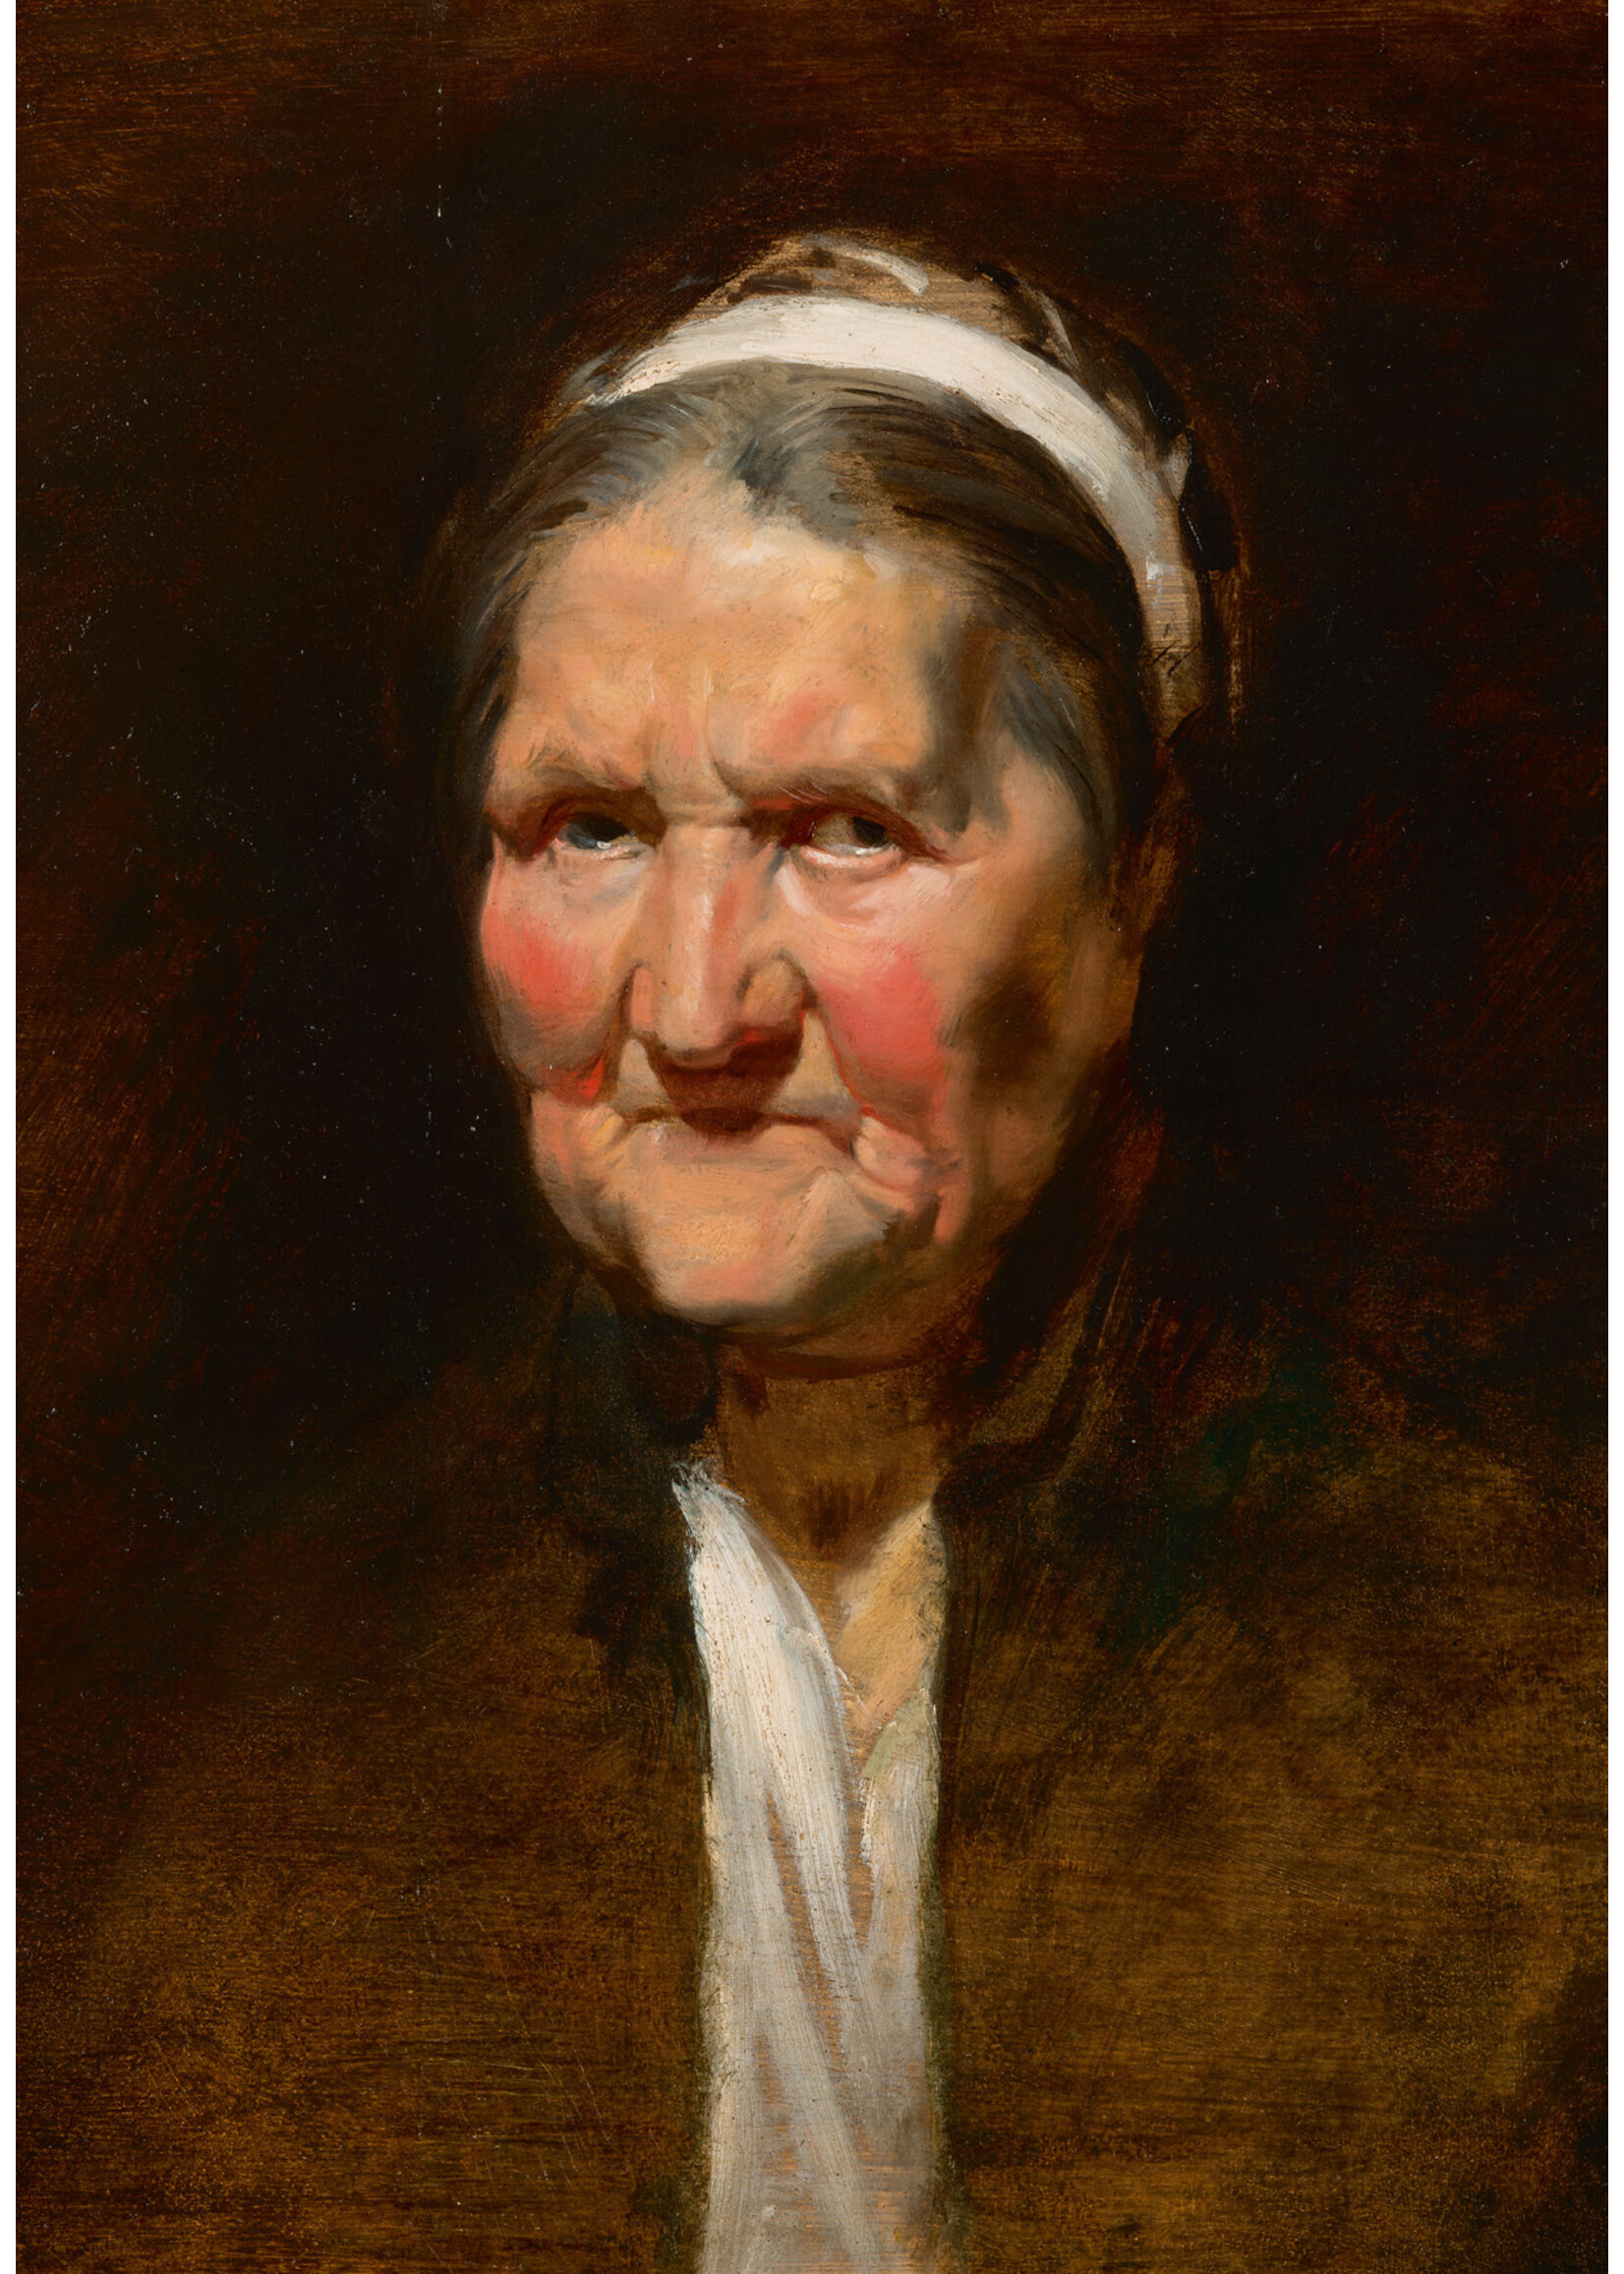 krasse koppen Peter Paul Rubens, Head Study of an Old Woman Seen from the Front, c. 1617